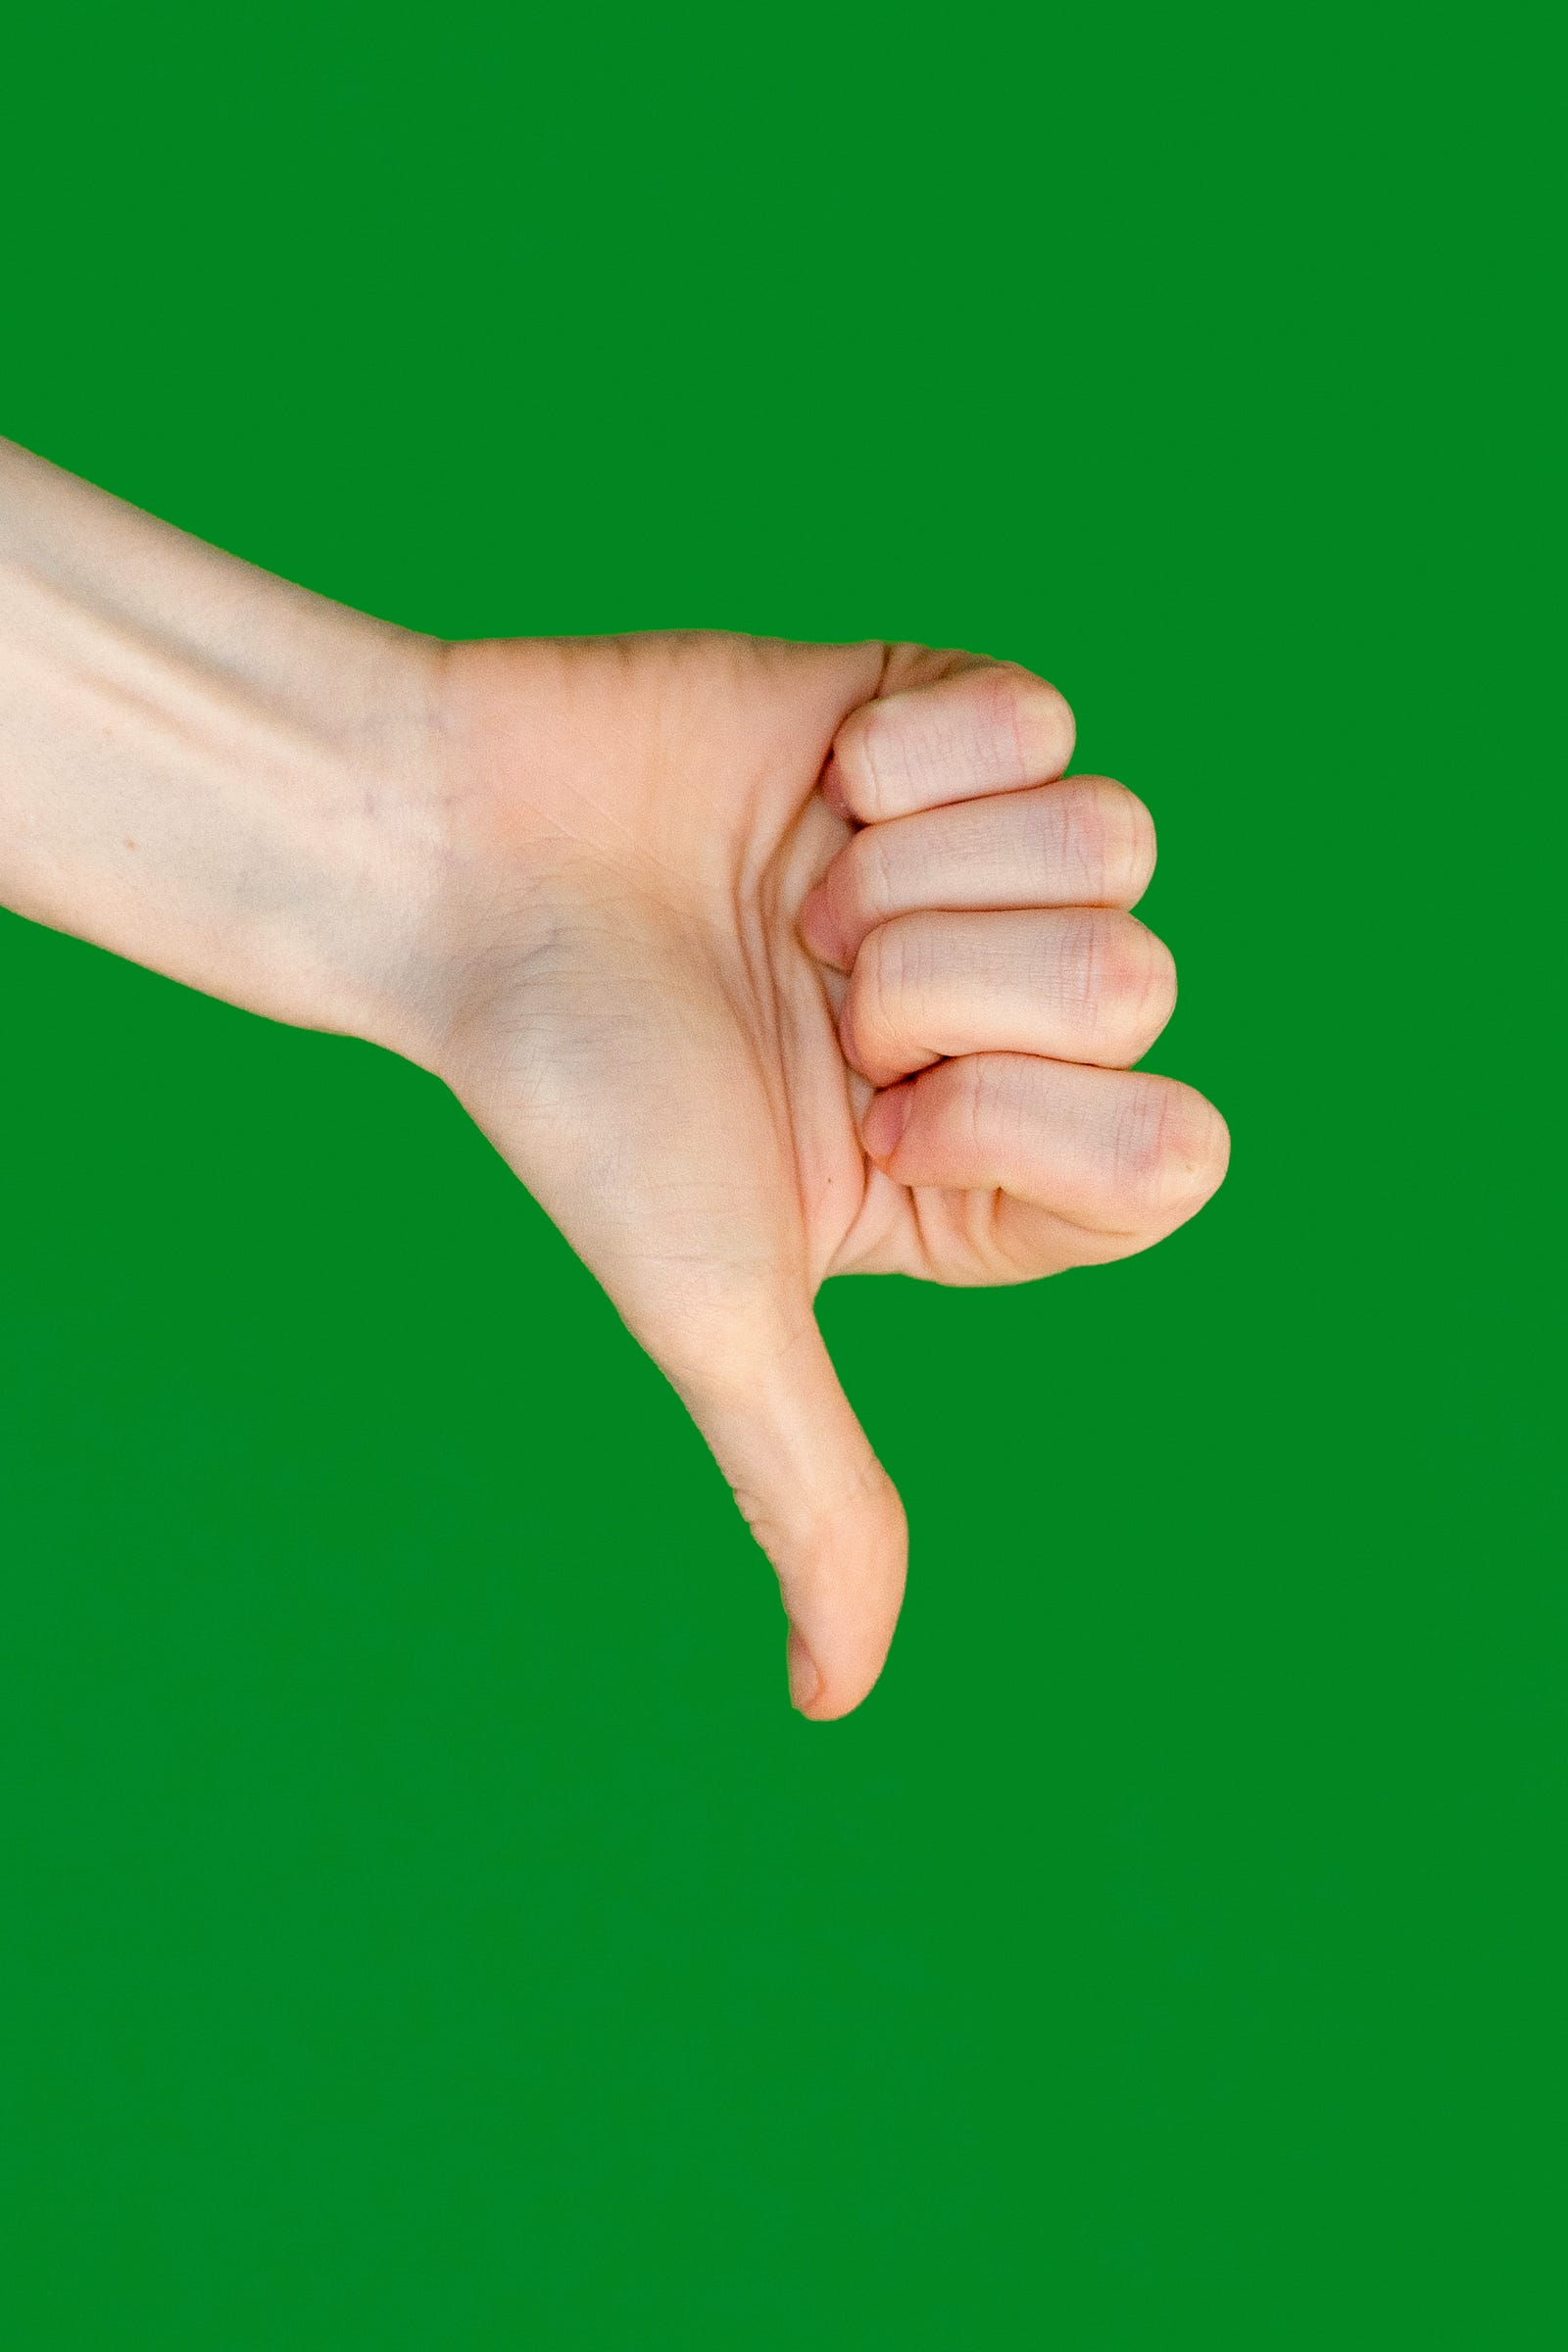 An white arm extends from the left to put a thumbs down. There is a green background. For me, thumbs down on polyphasic sleep. There’s no evidence that a polyphasic sleep schedule that limits your total sleep time is effective for maintaining optimal mental and physical health.